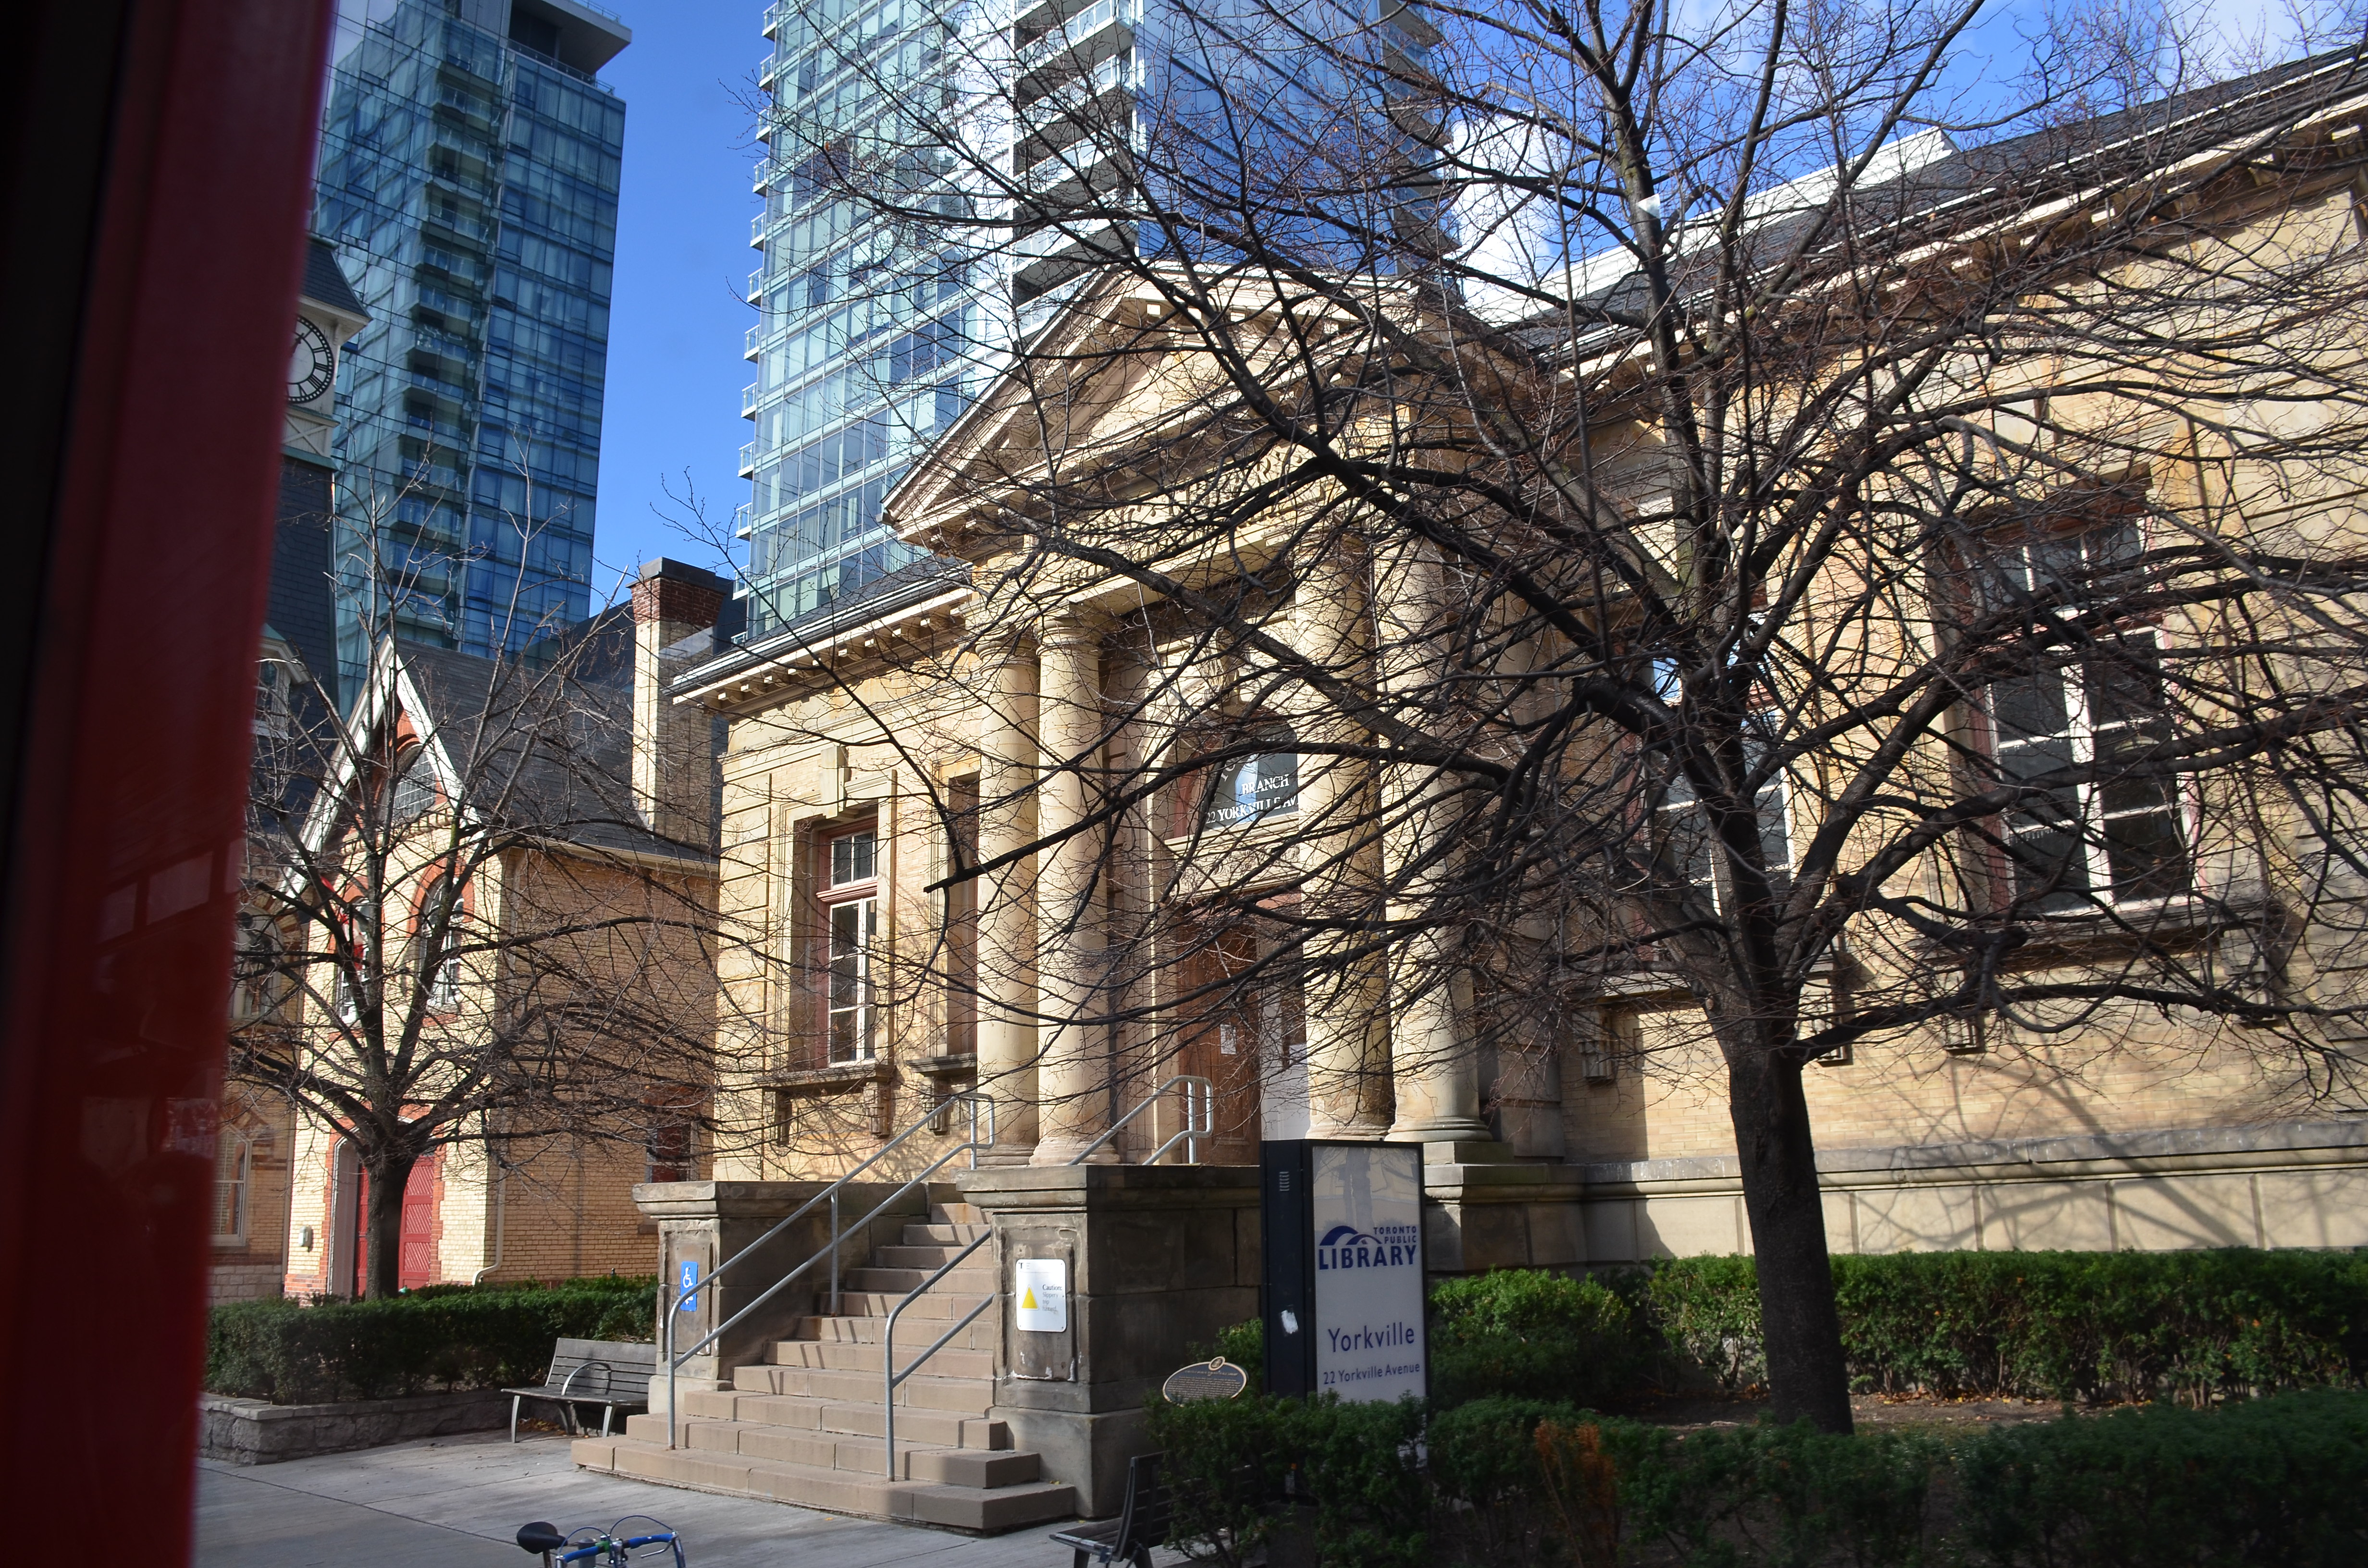 Yorkville branch of the Toronto Public Library